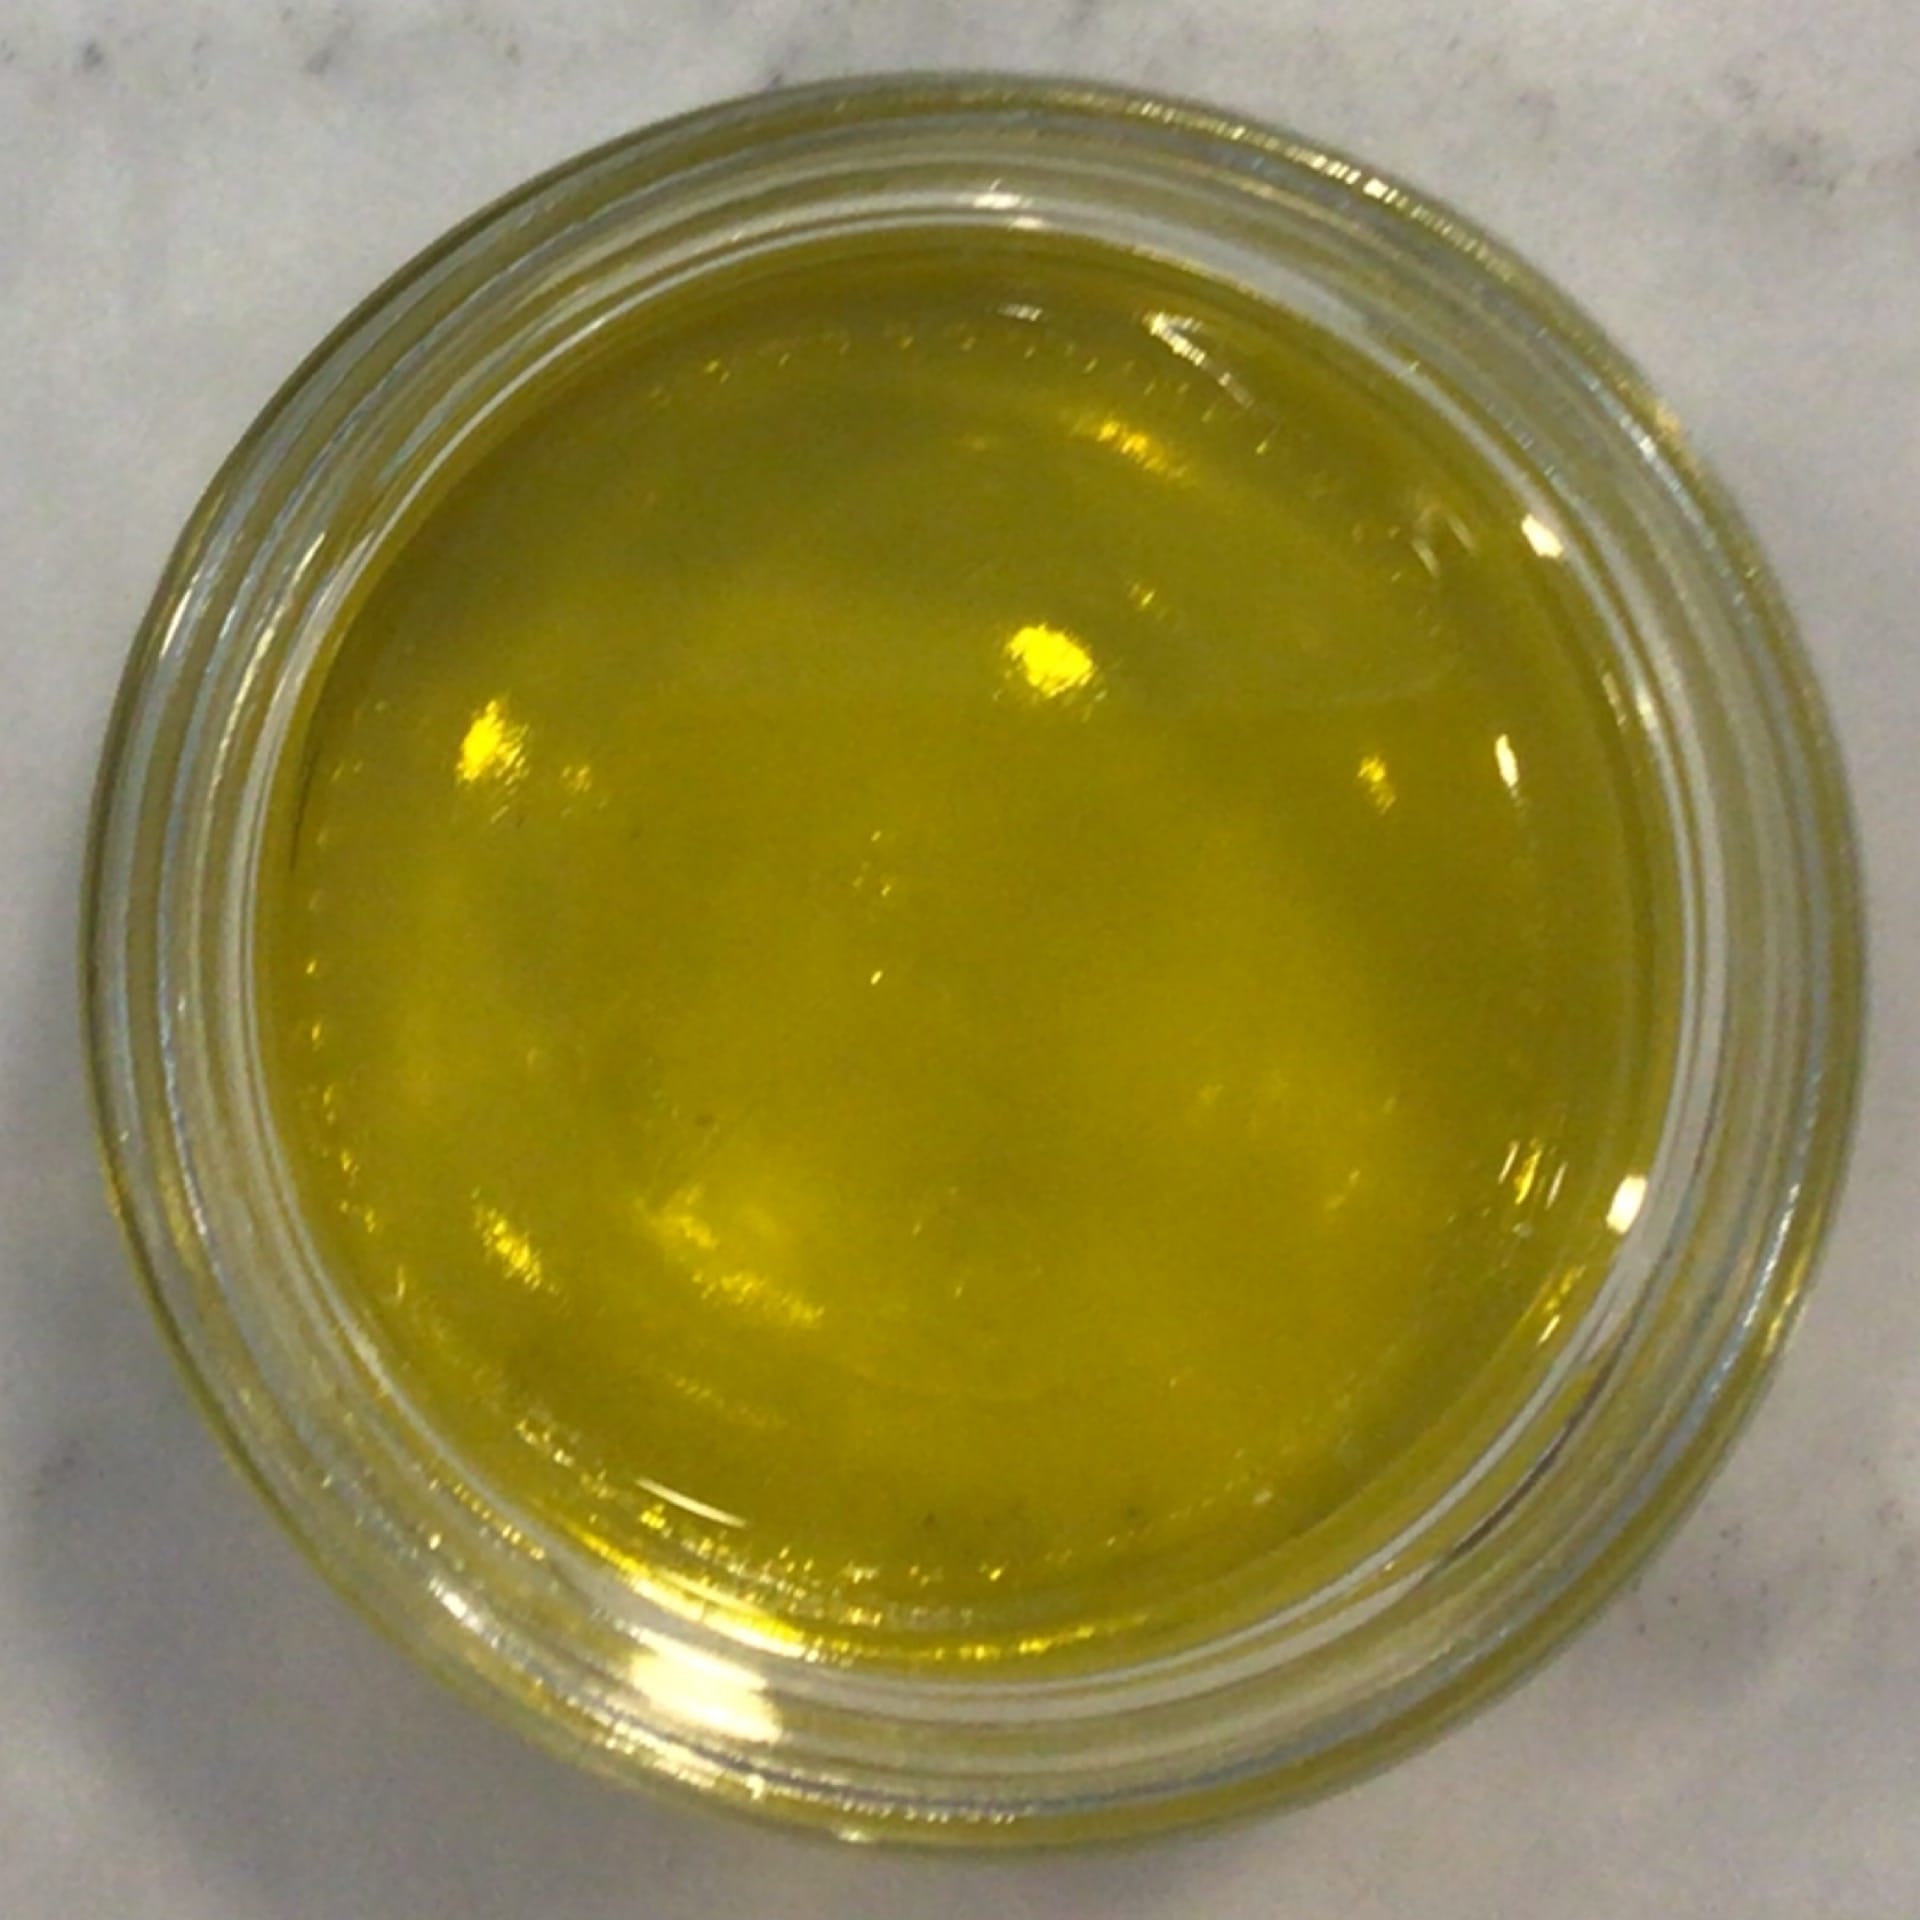 California extra virgin olive oil, fill your own container with organic olive oil refill